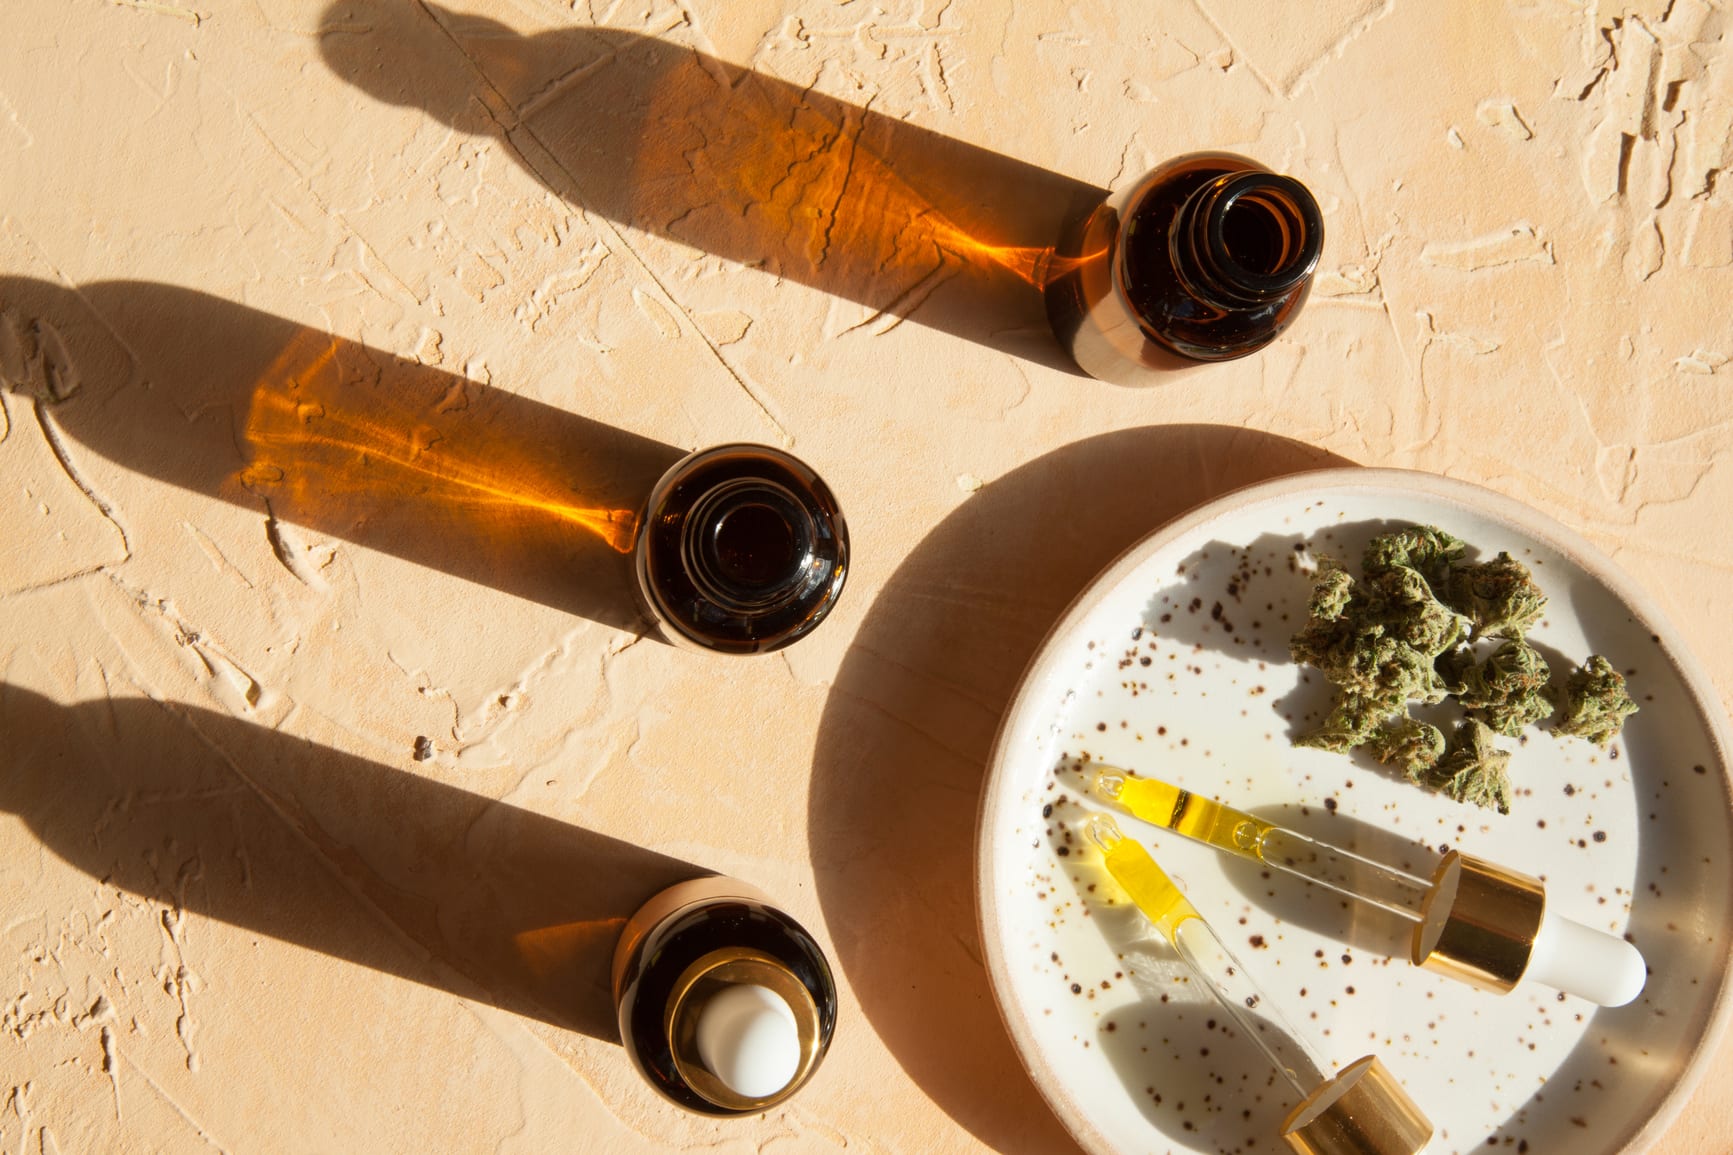 Cbd/cannabis Oil Bottles And Droppers In Sunlight